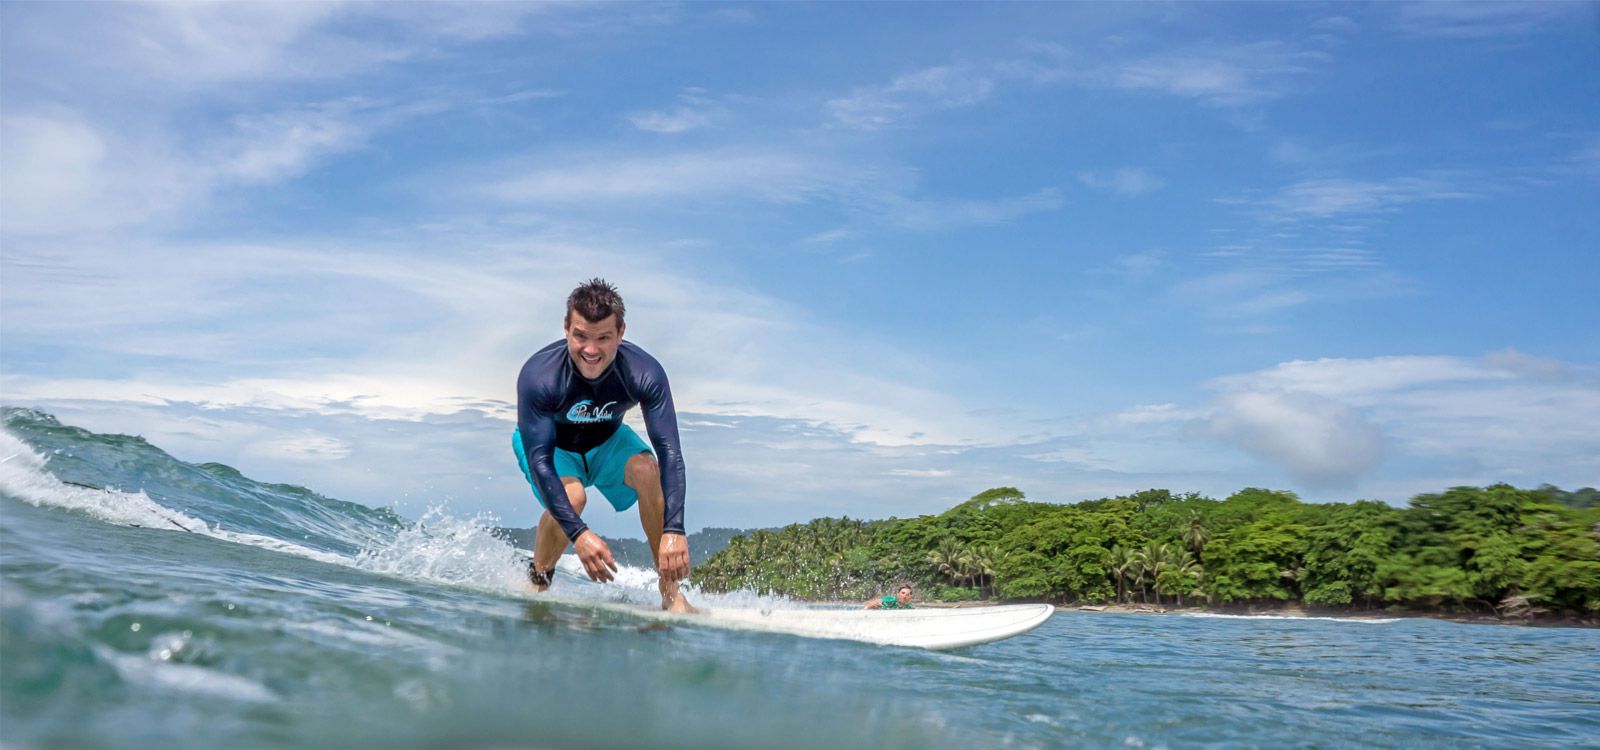 Man Surfing on his Costa Rica Surf Vacation